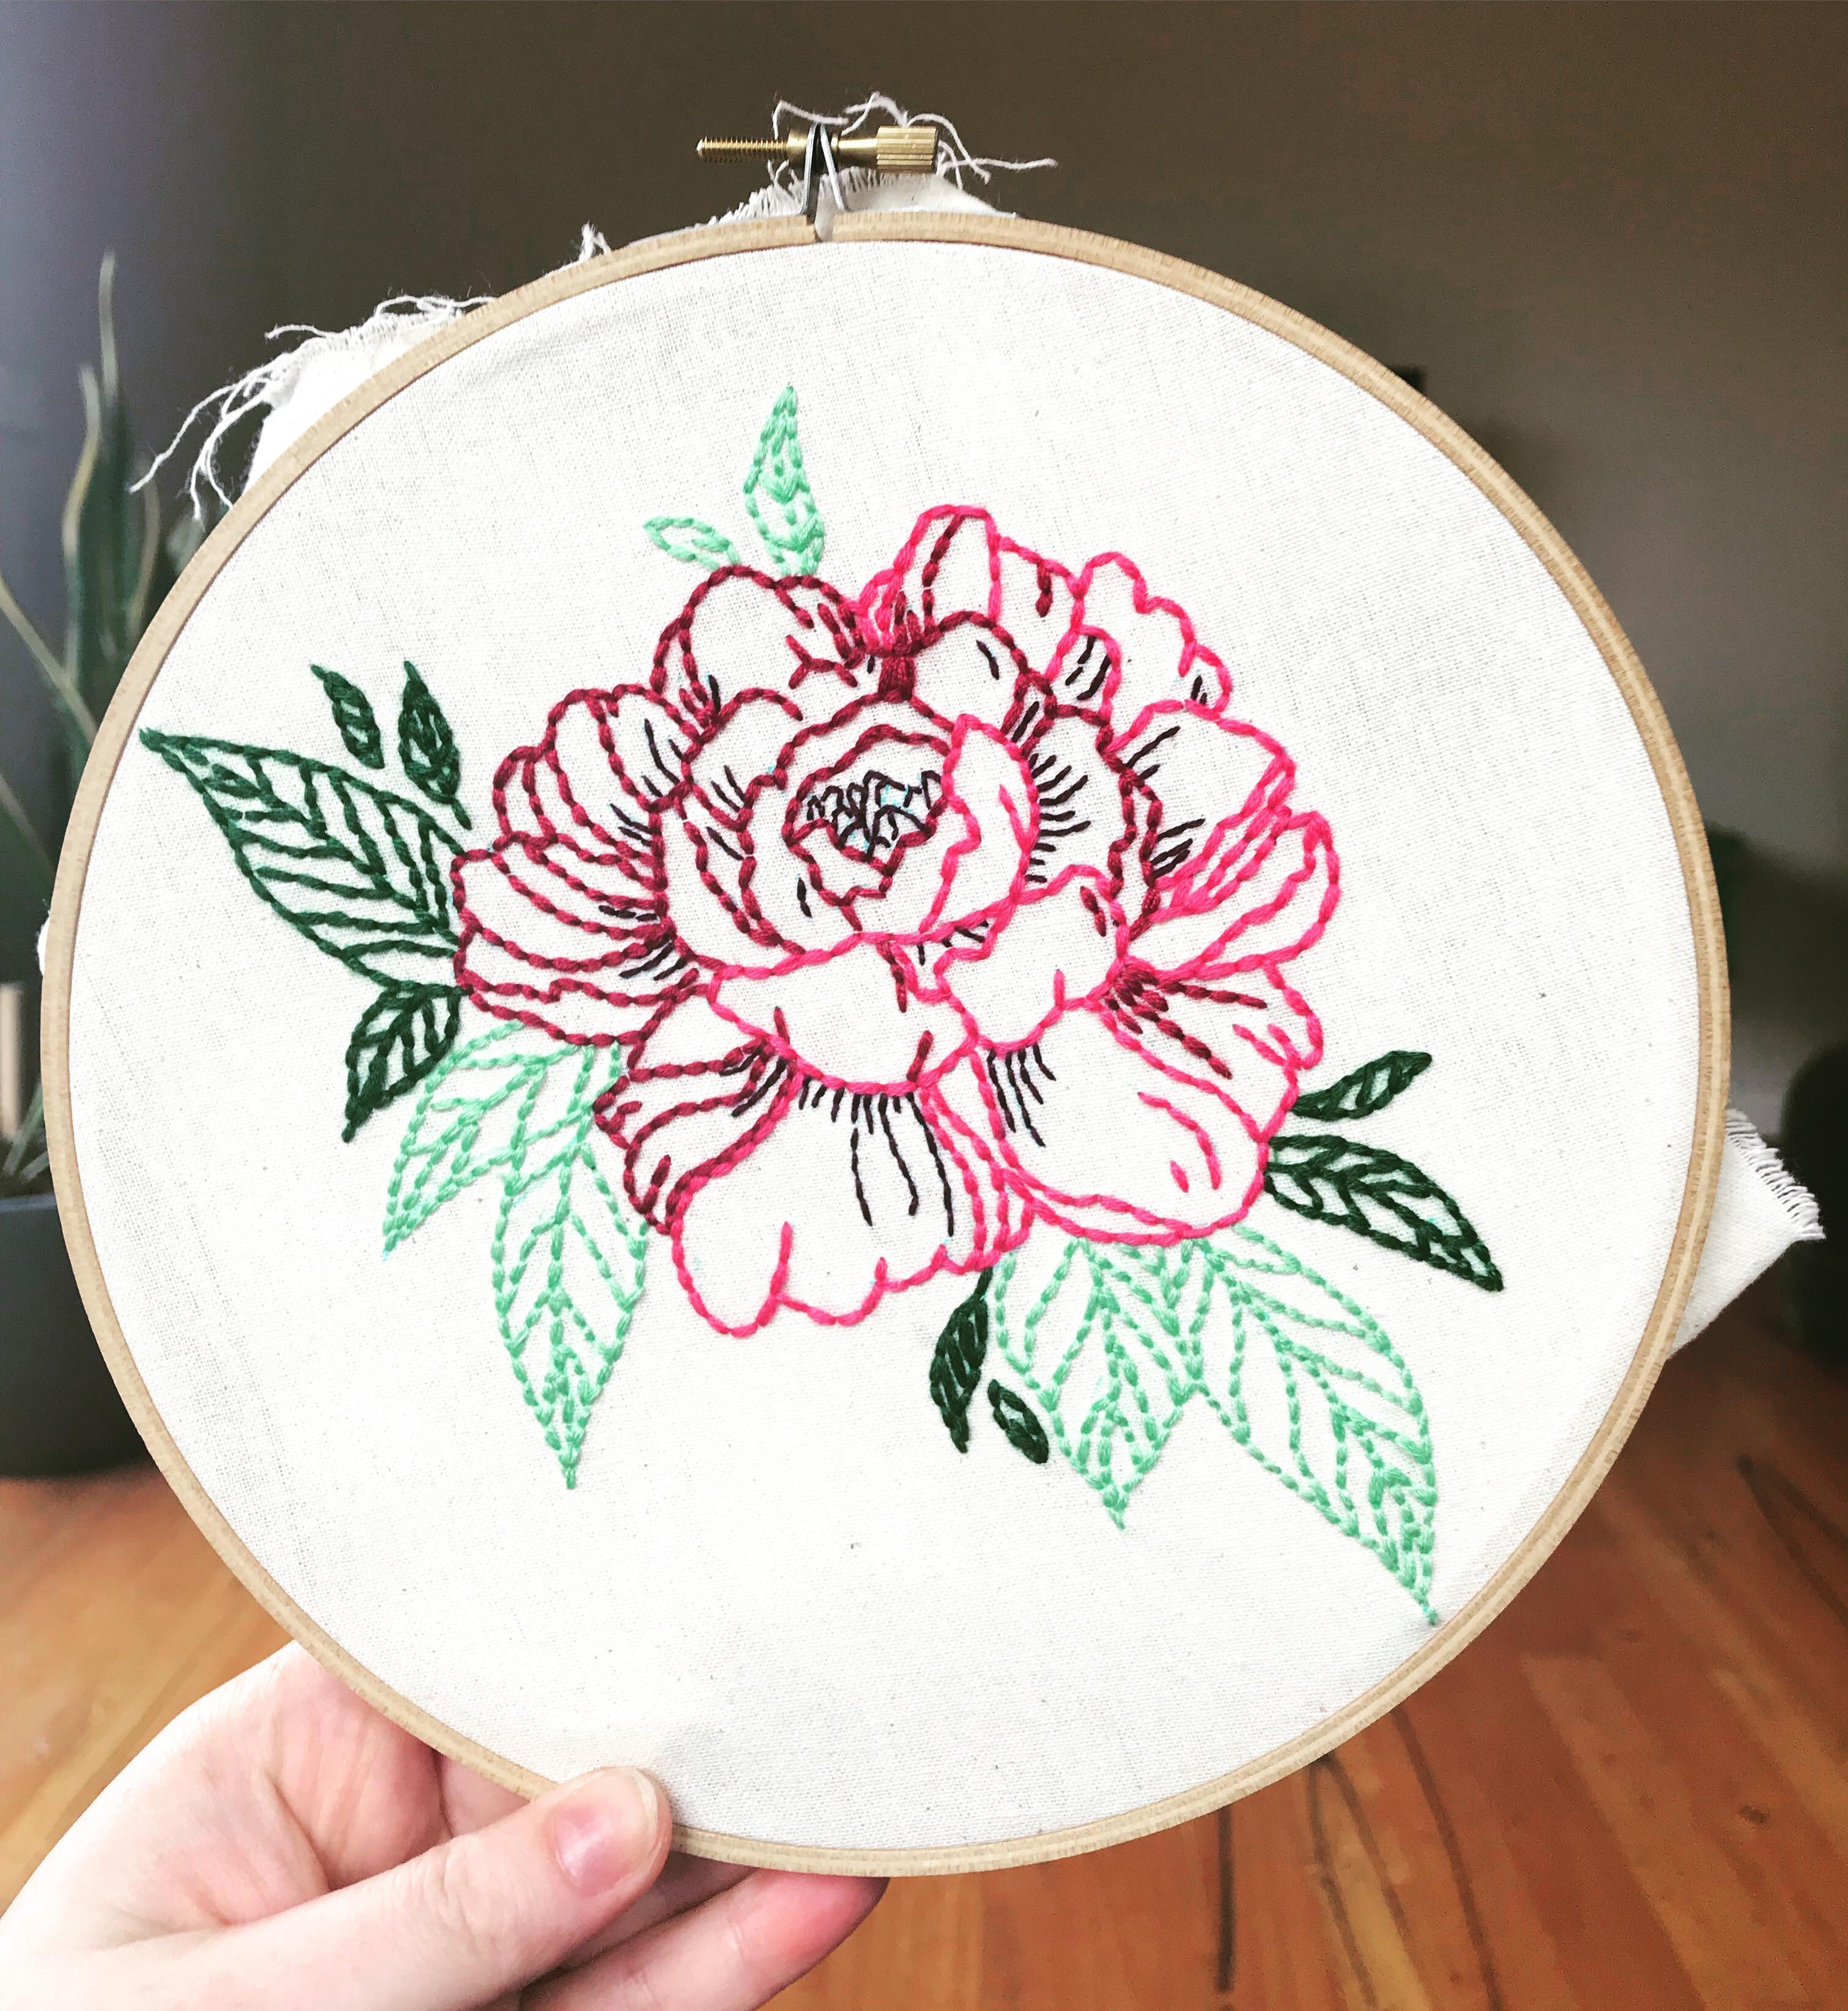 Dmc Embroidery Patterns From A Dmc Free Pattern Such A Great Resource For Beginners